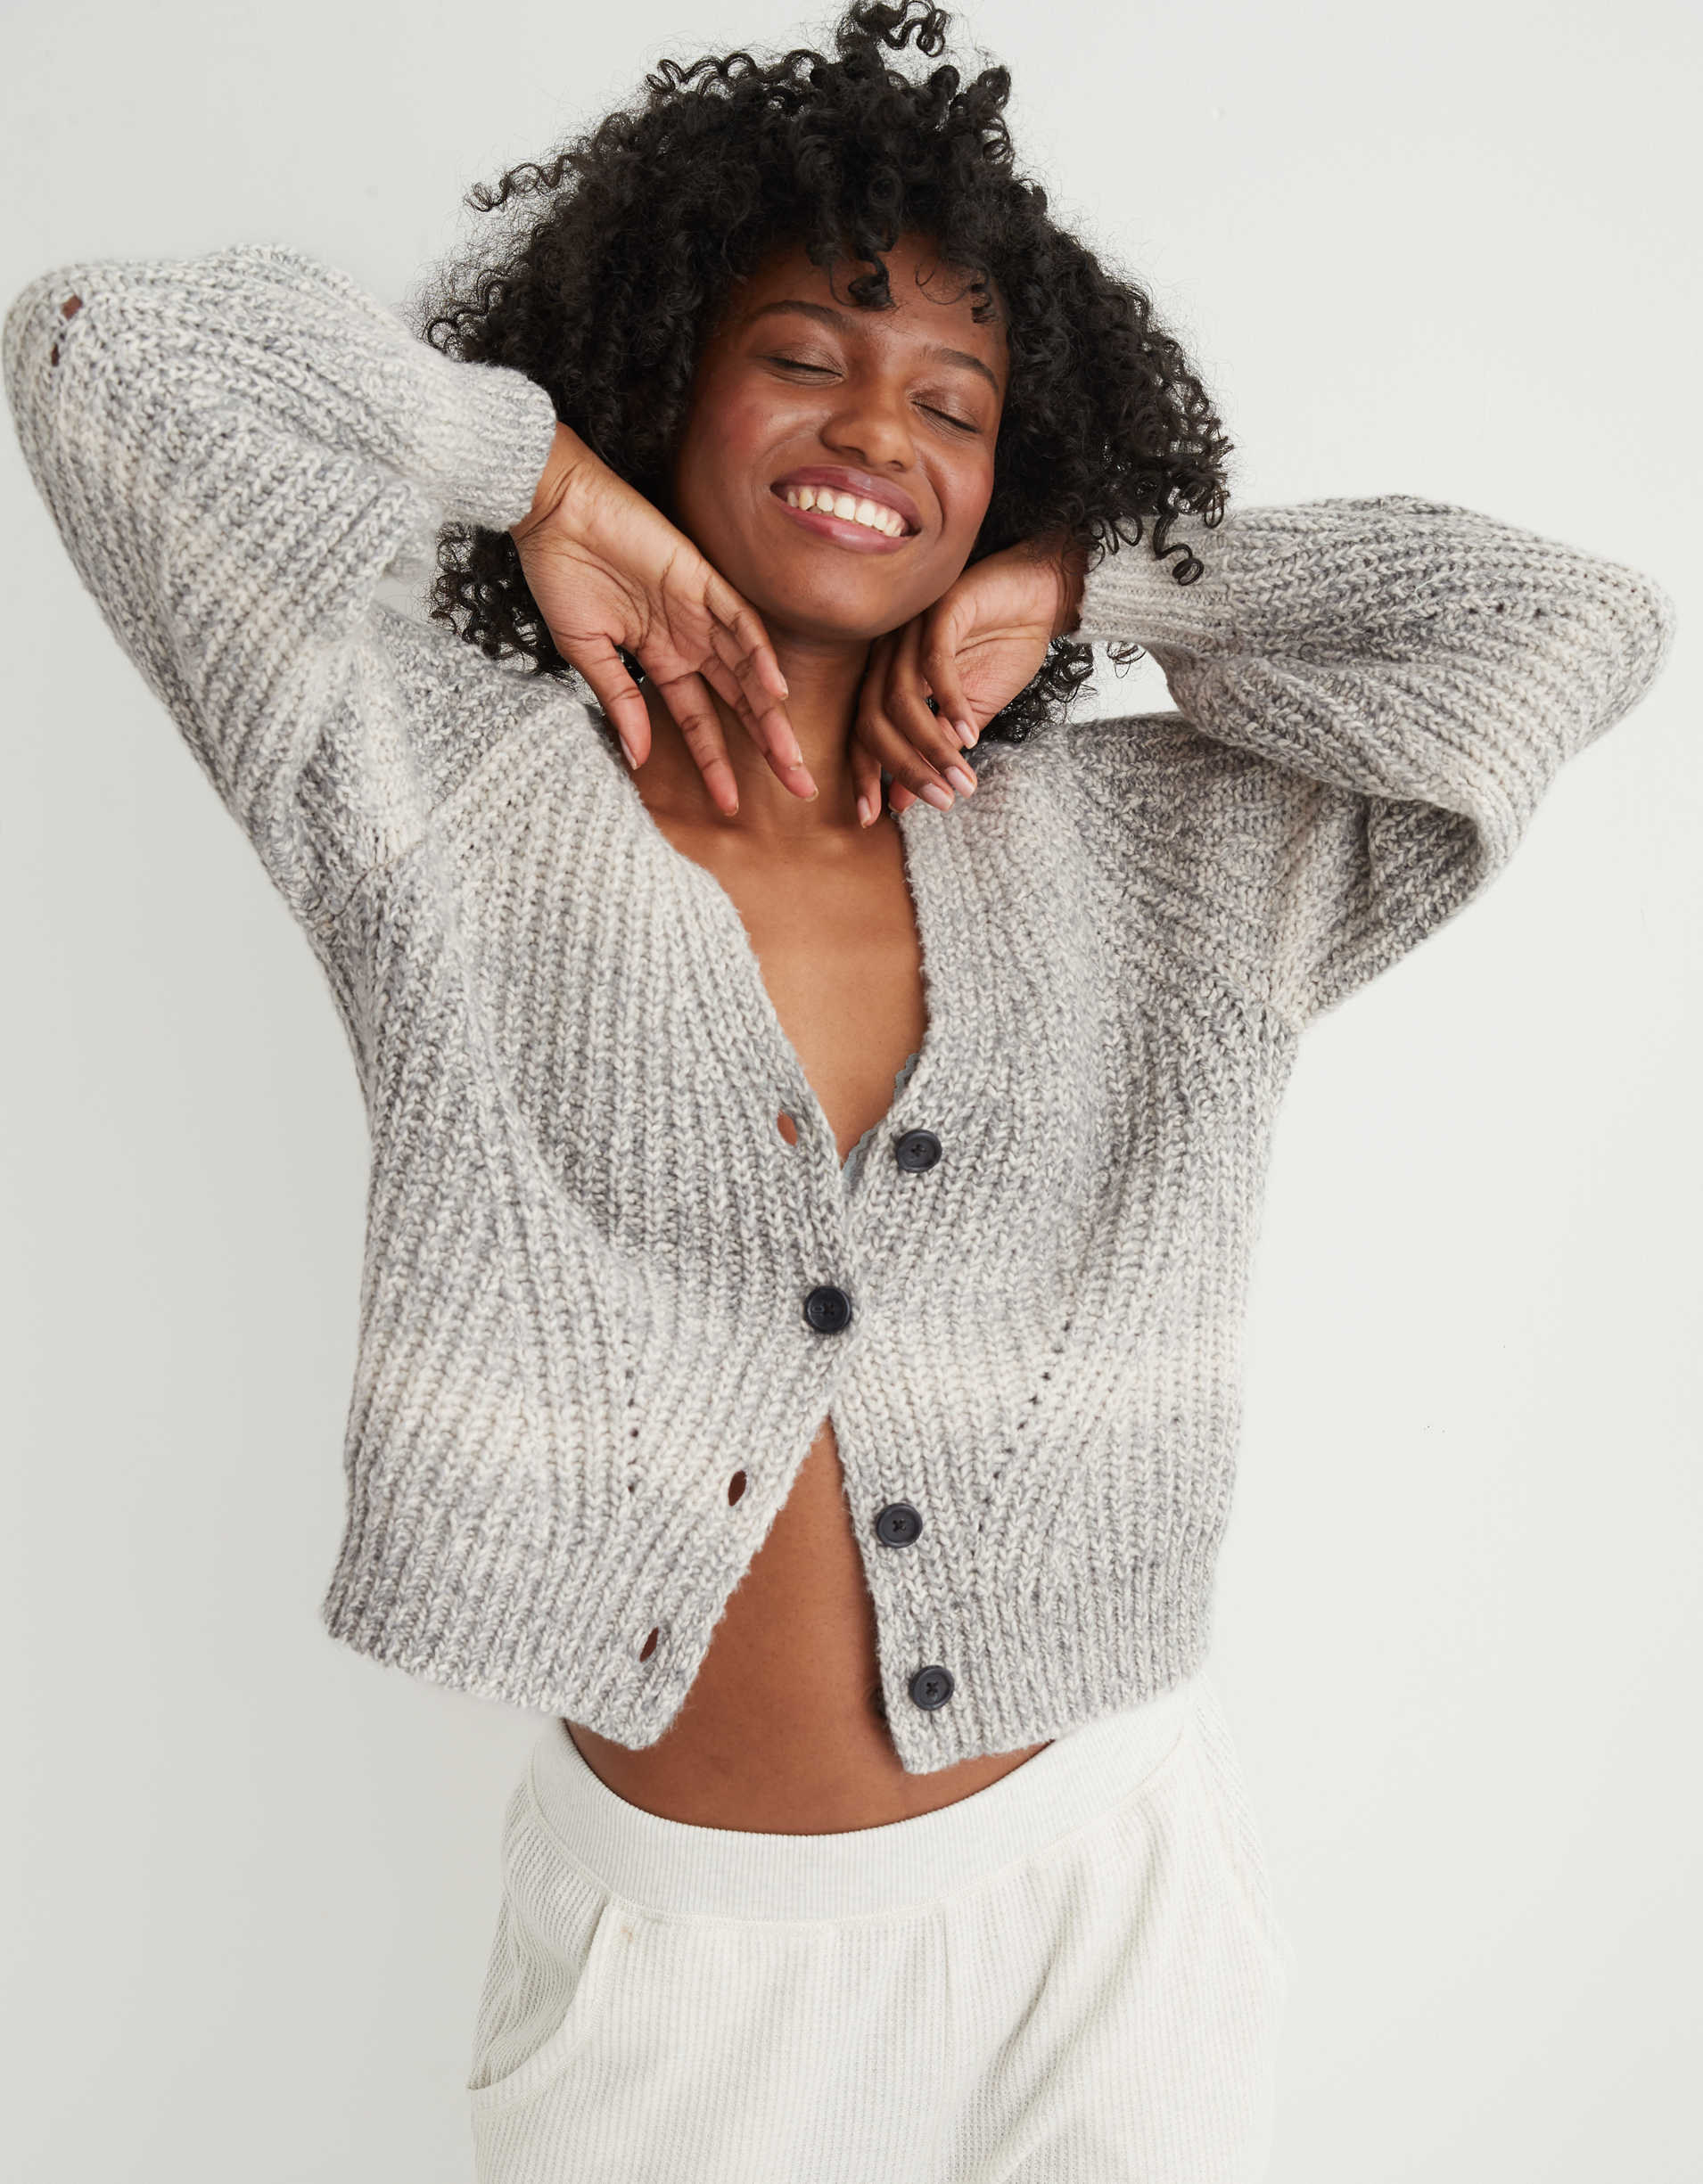 Model wearing the knitted cardigan with an ombre pattern on it and black buttons